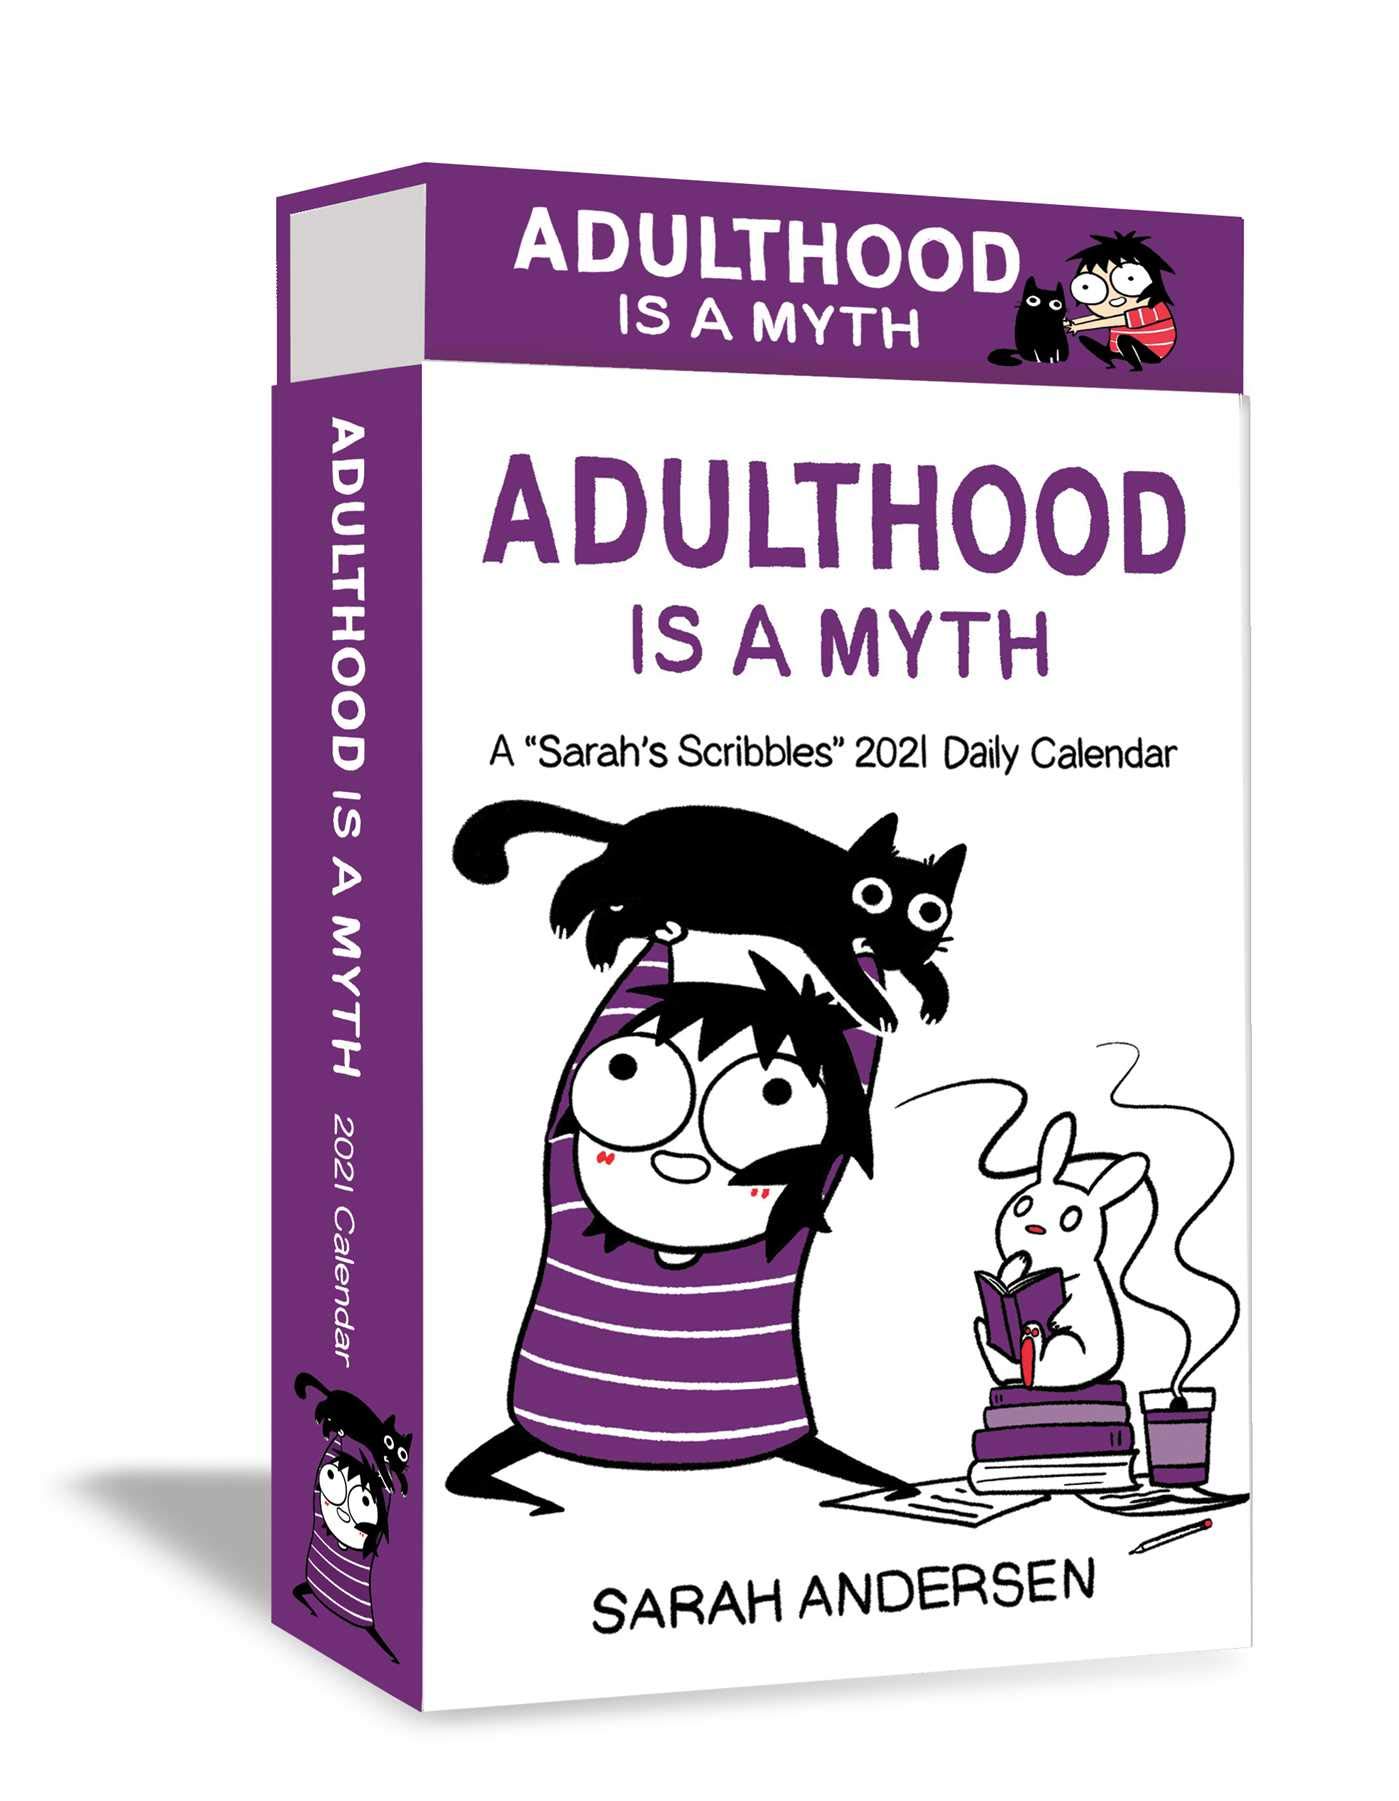 Sarah's Scribbles 2021 Deluxe Day-to-Day Calendar: Adulthood Is a Myth